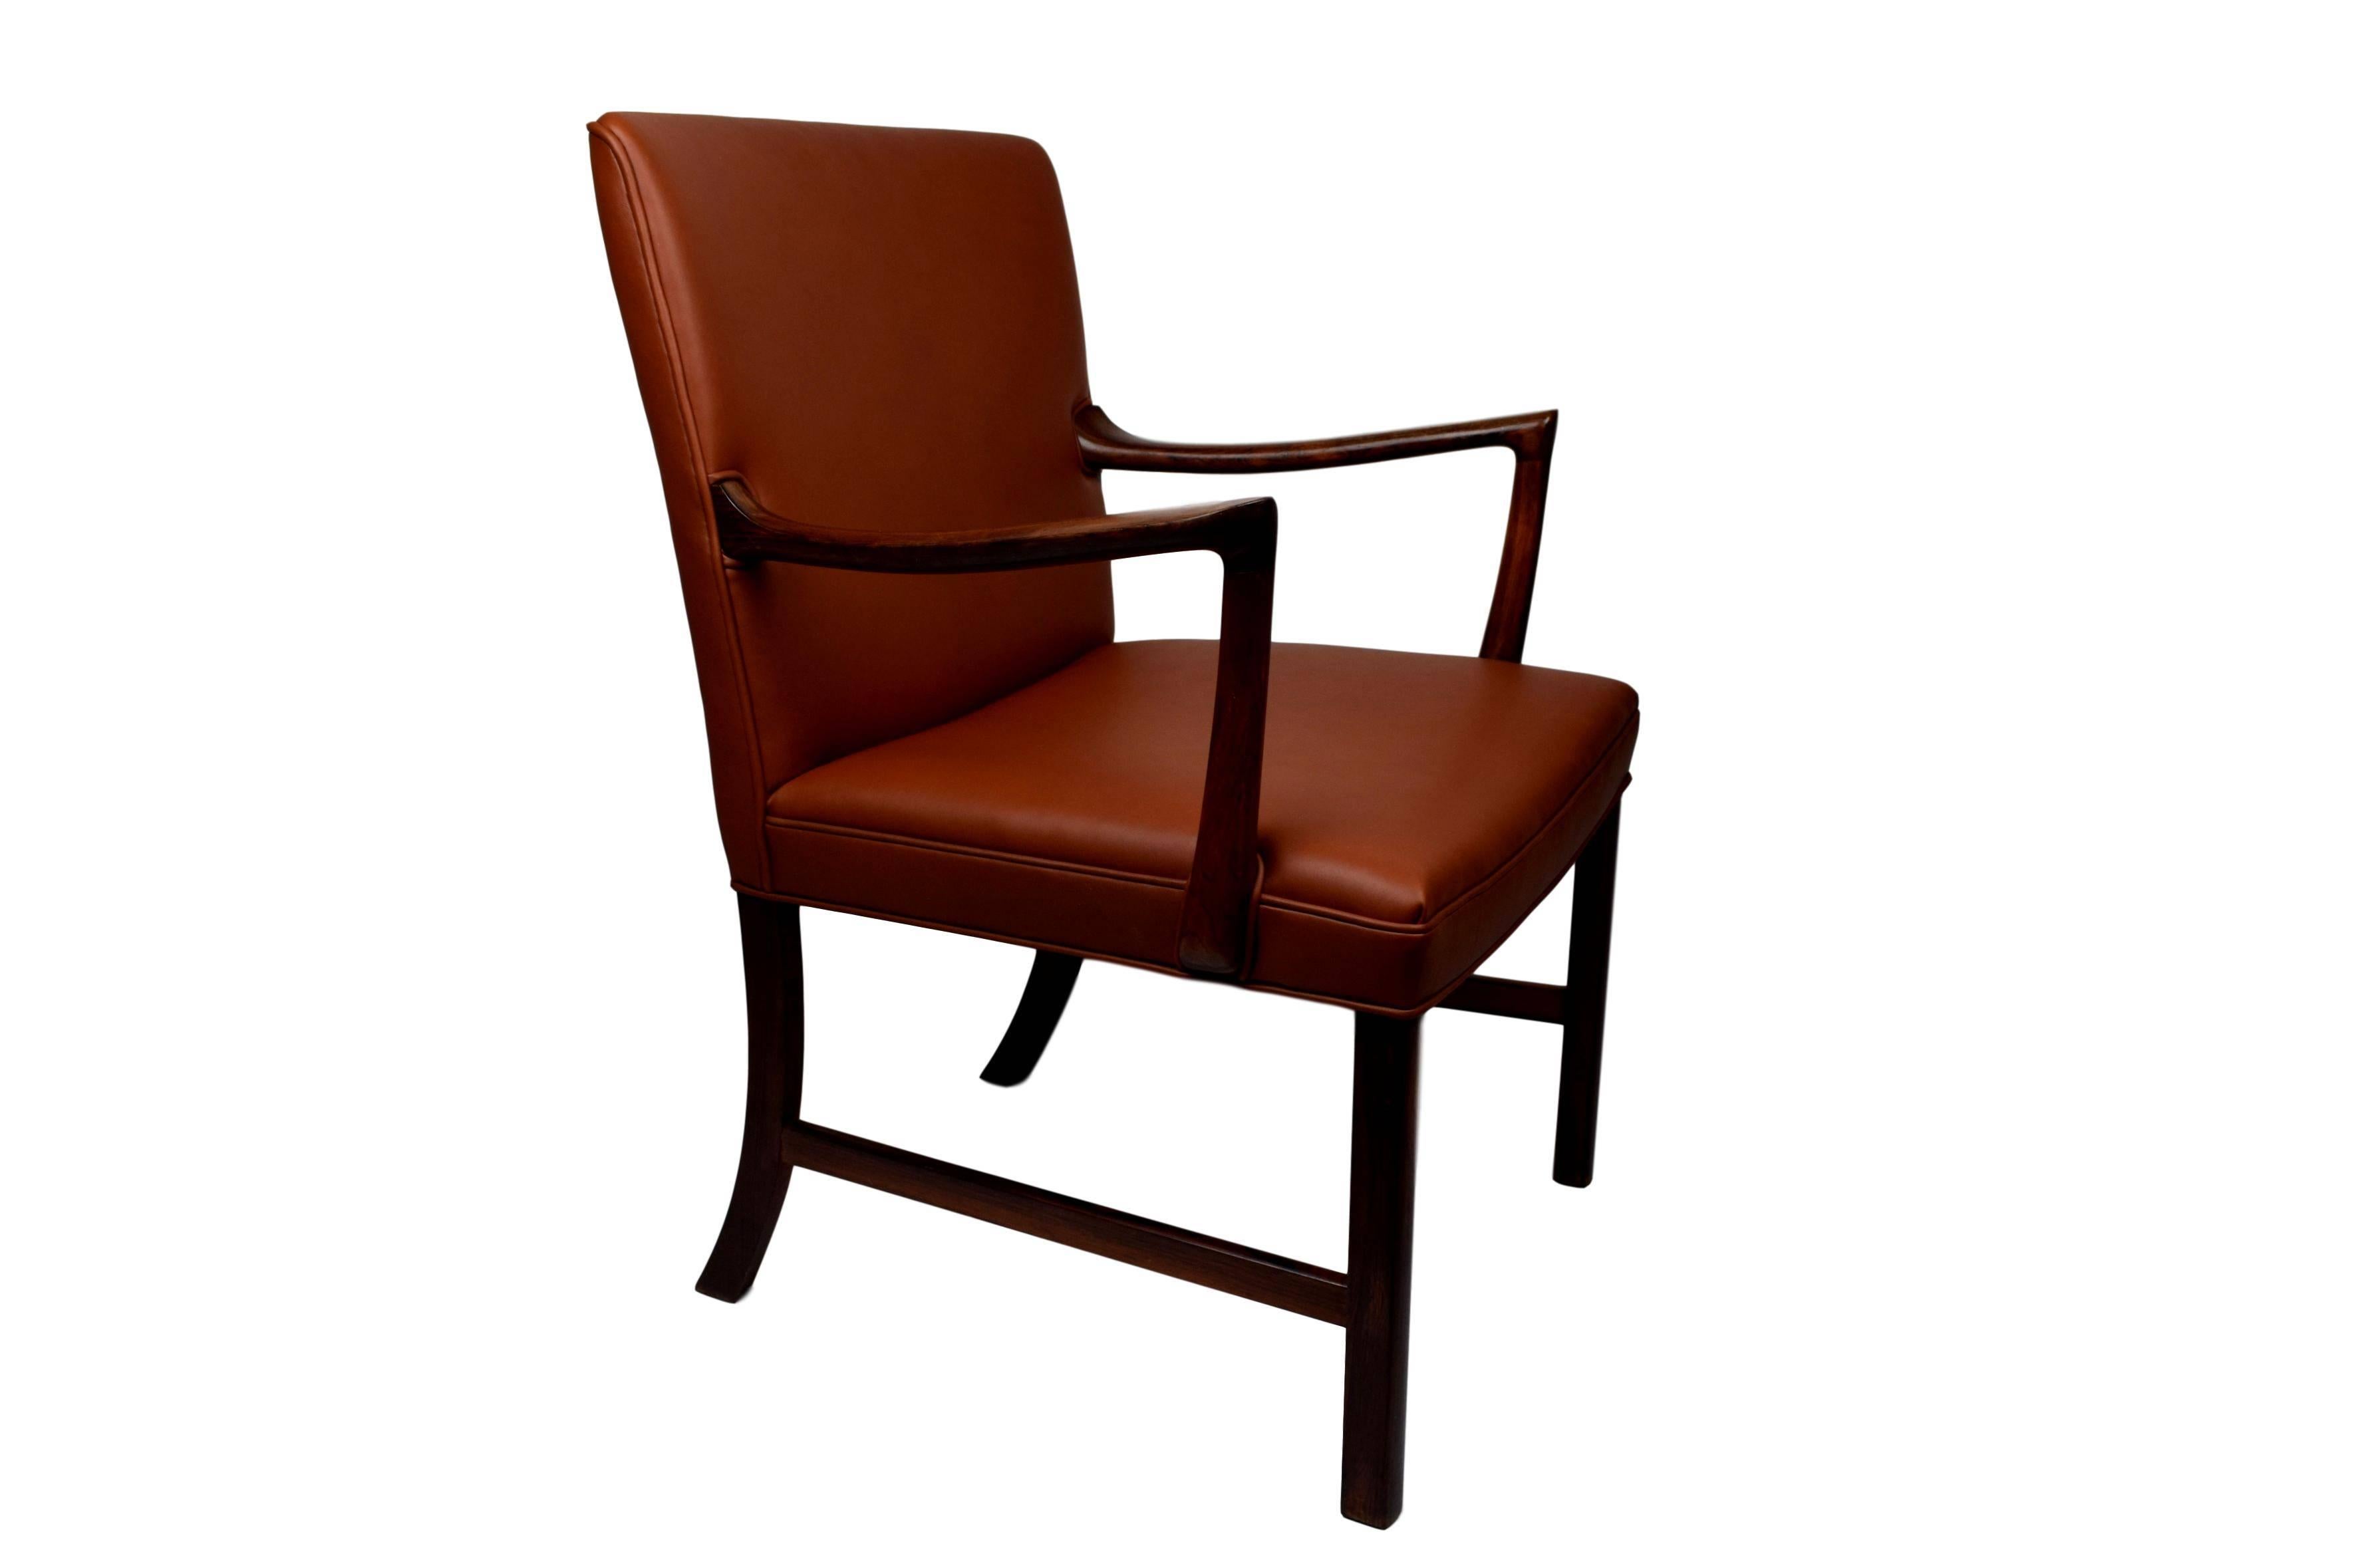 Scandinavian Modern Midcentury Rosewood Armchair by Ole Wanscher, Upholstered with Aniline Leather For Sale